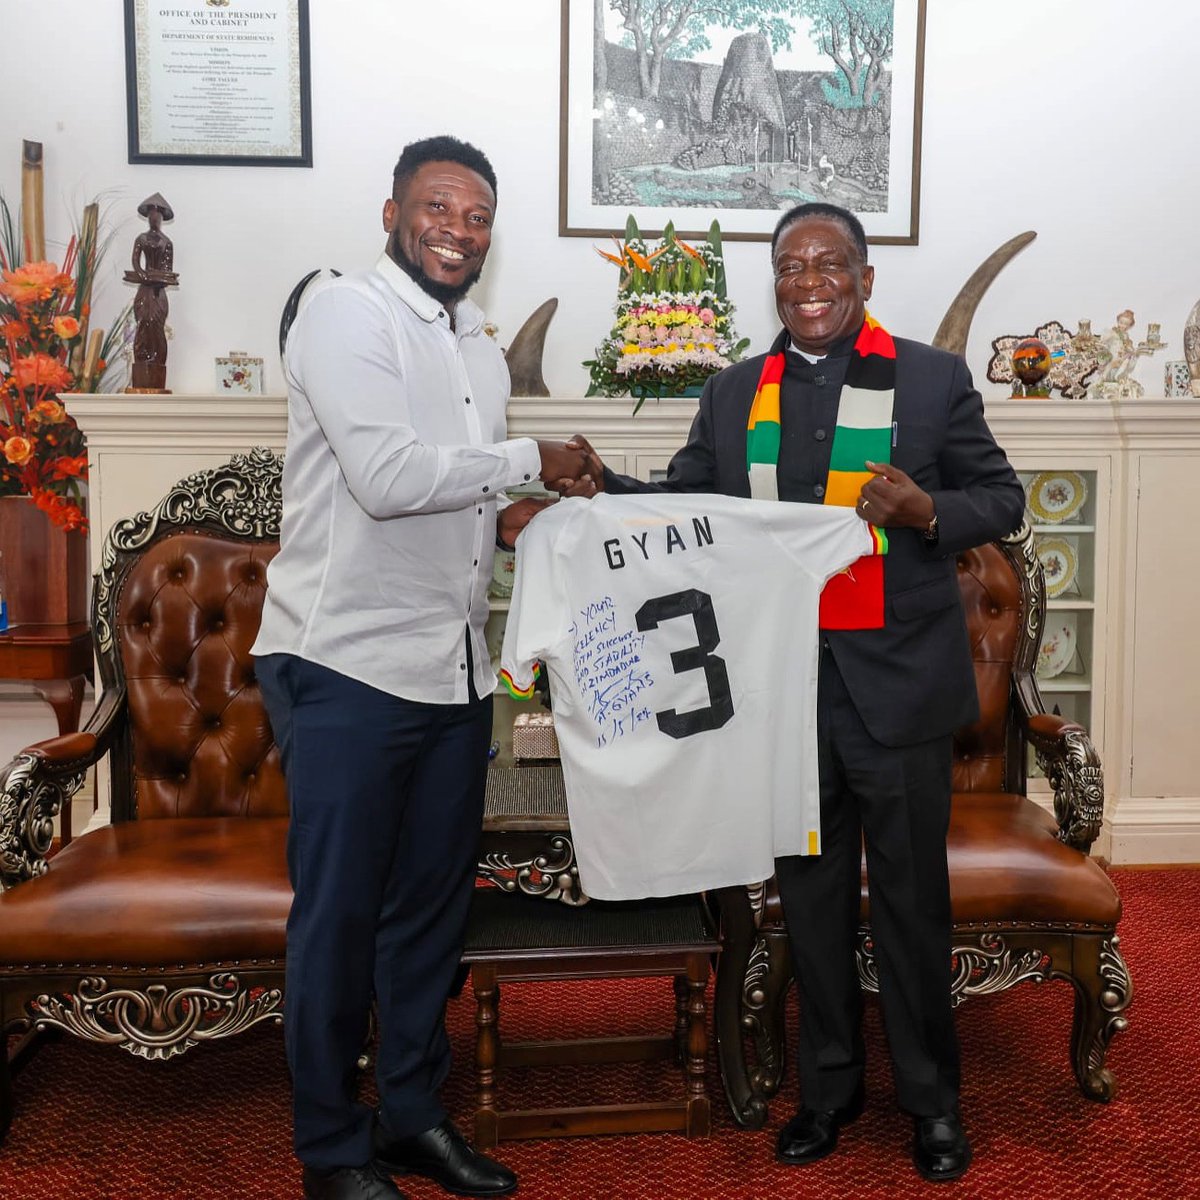 It was an honour to receive Asamoah Gyan at State House today. His remarkable career and leadership on the field have inspired millions across Africa. We discussed the power of sports in uniting nations and promoting youth development.